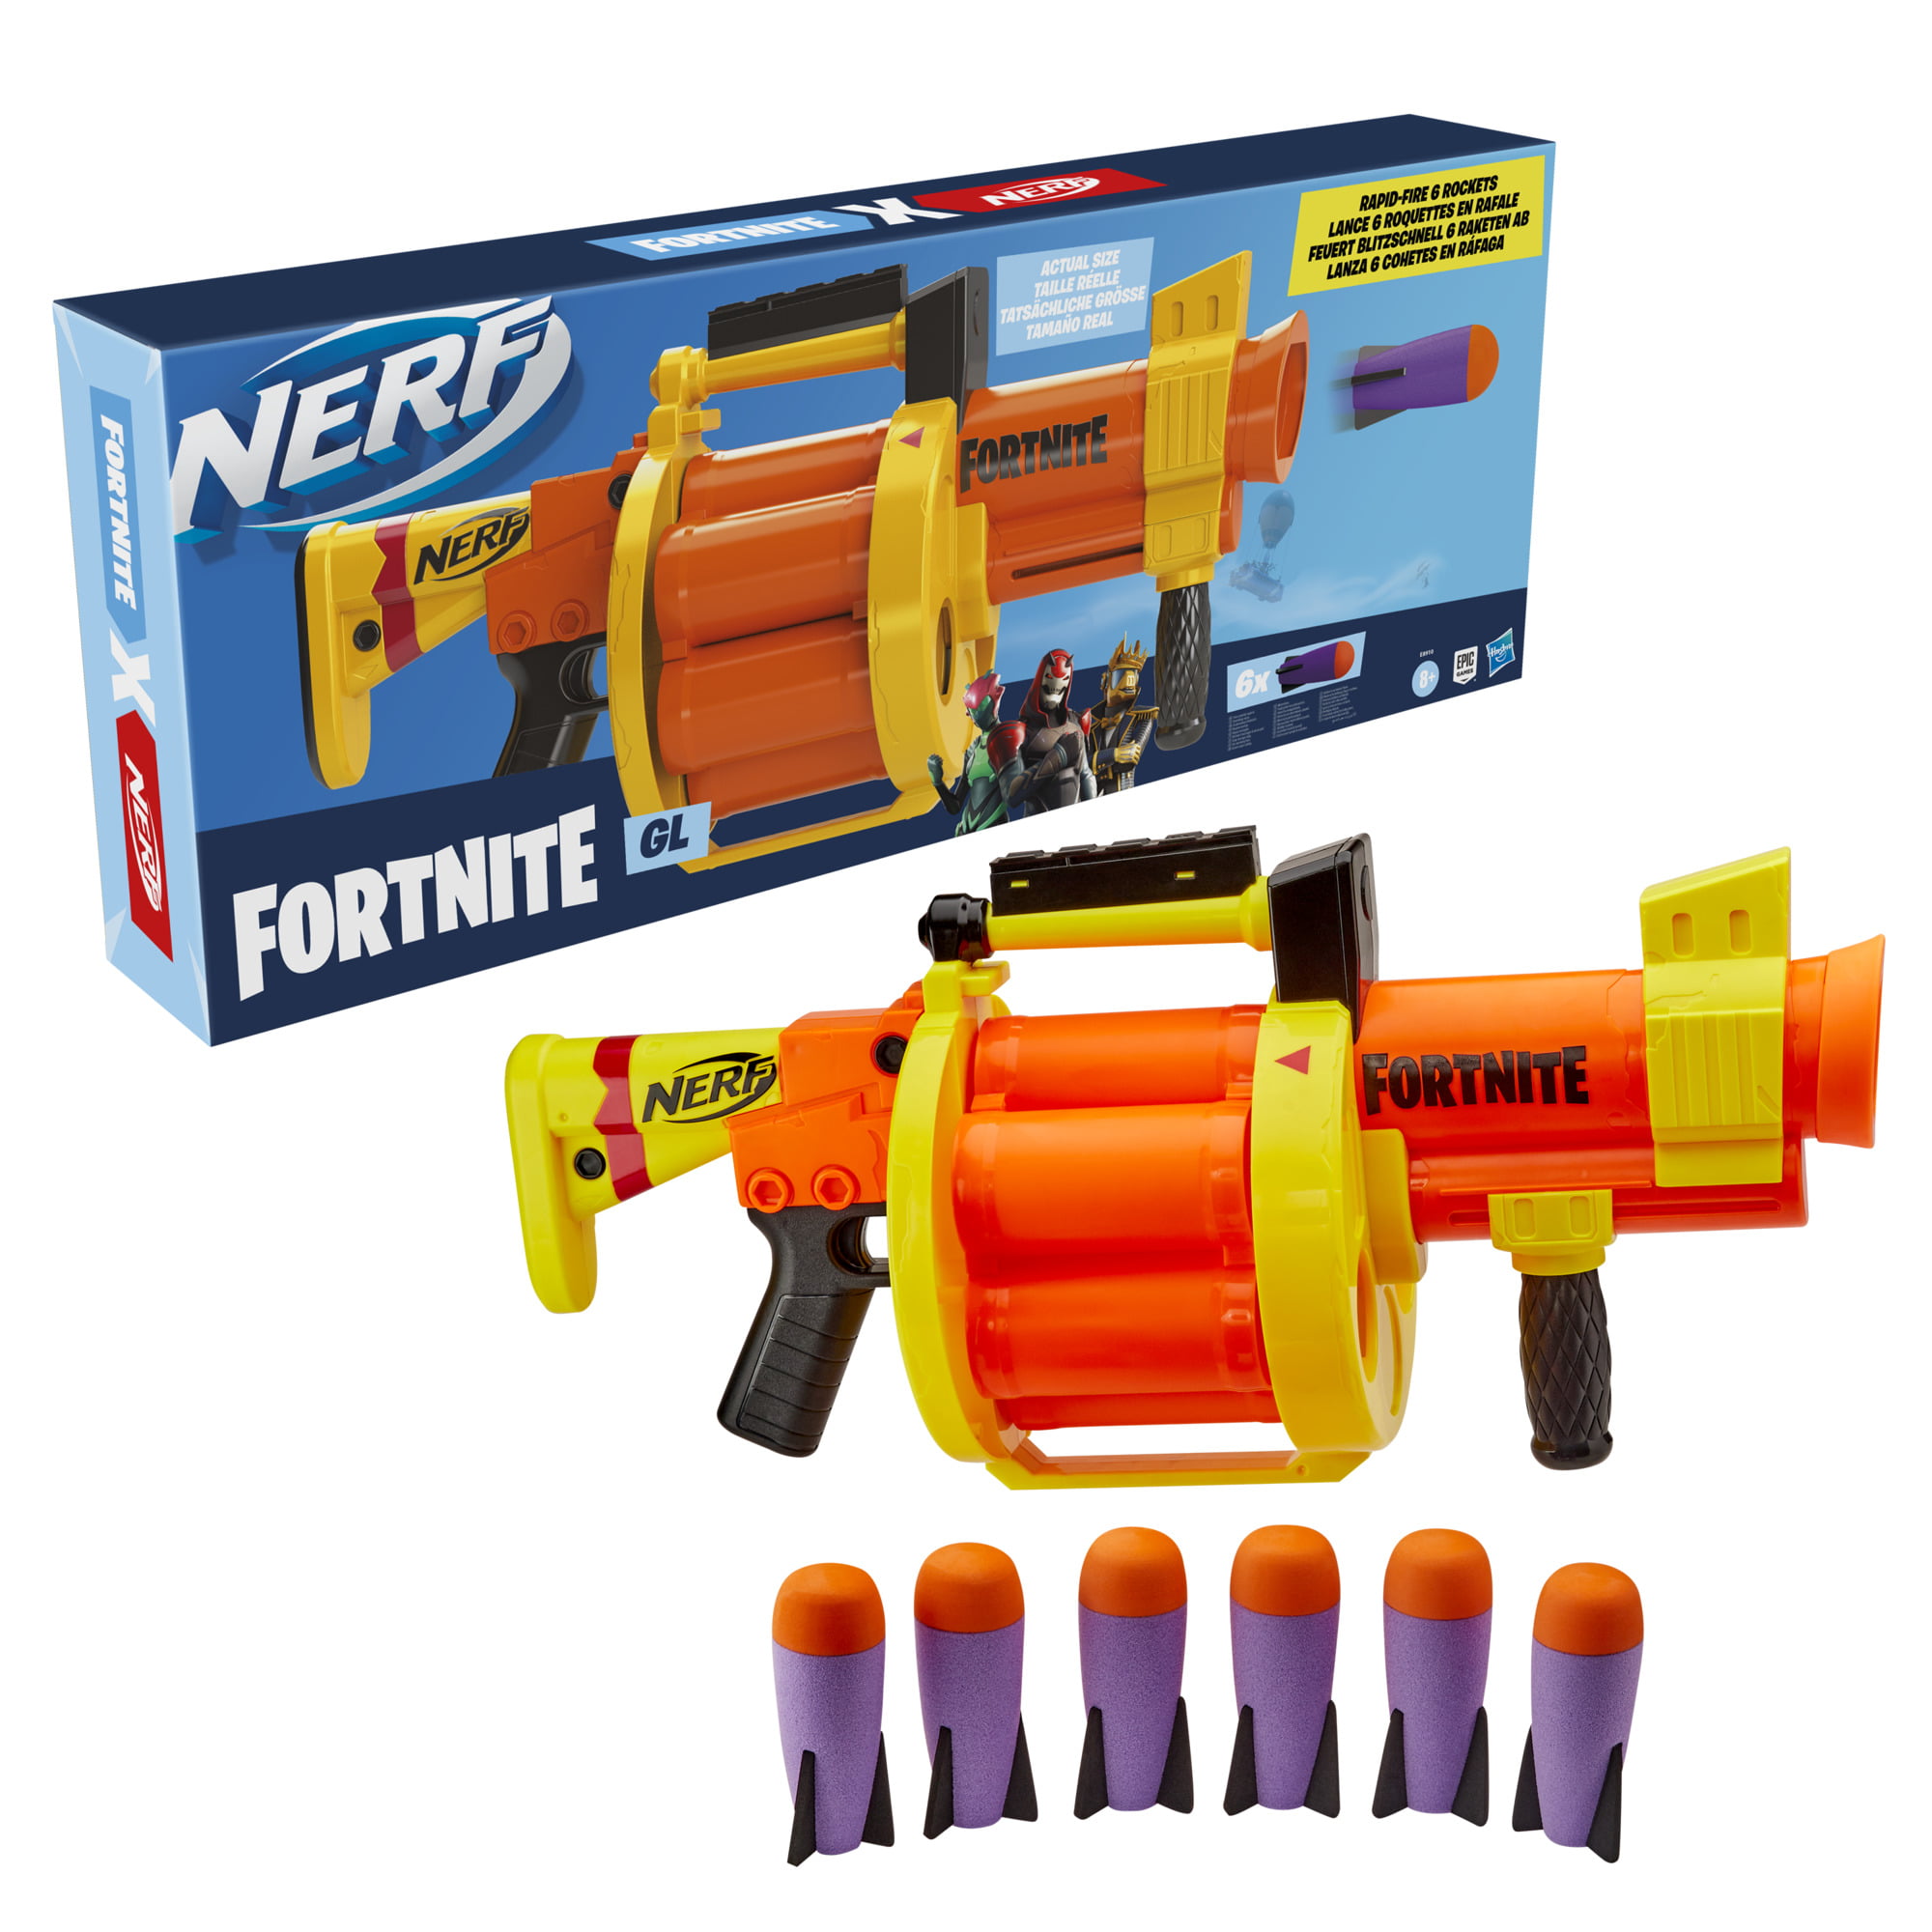 Nerf Fortnite GL Blaster, Includes 6 Official Nerf Darts, Drum and Shield